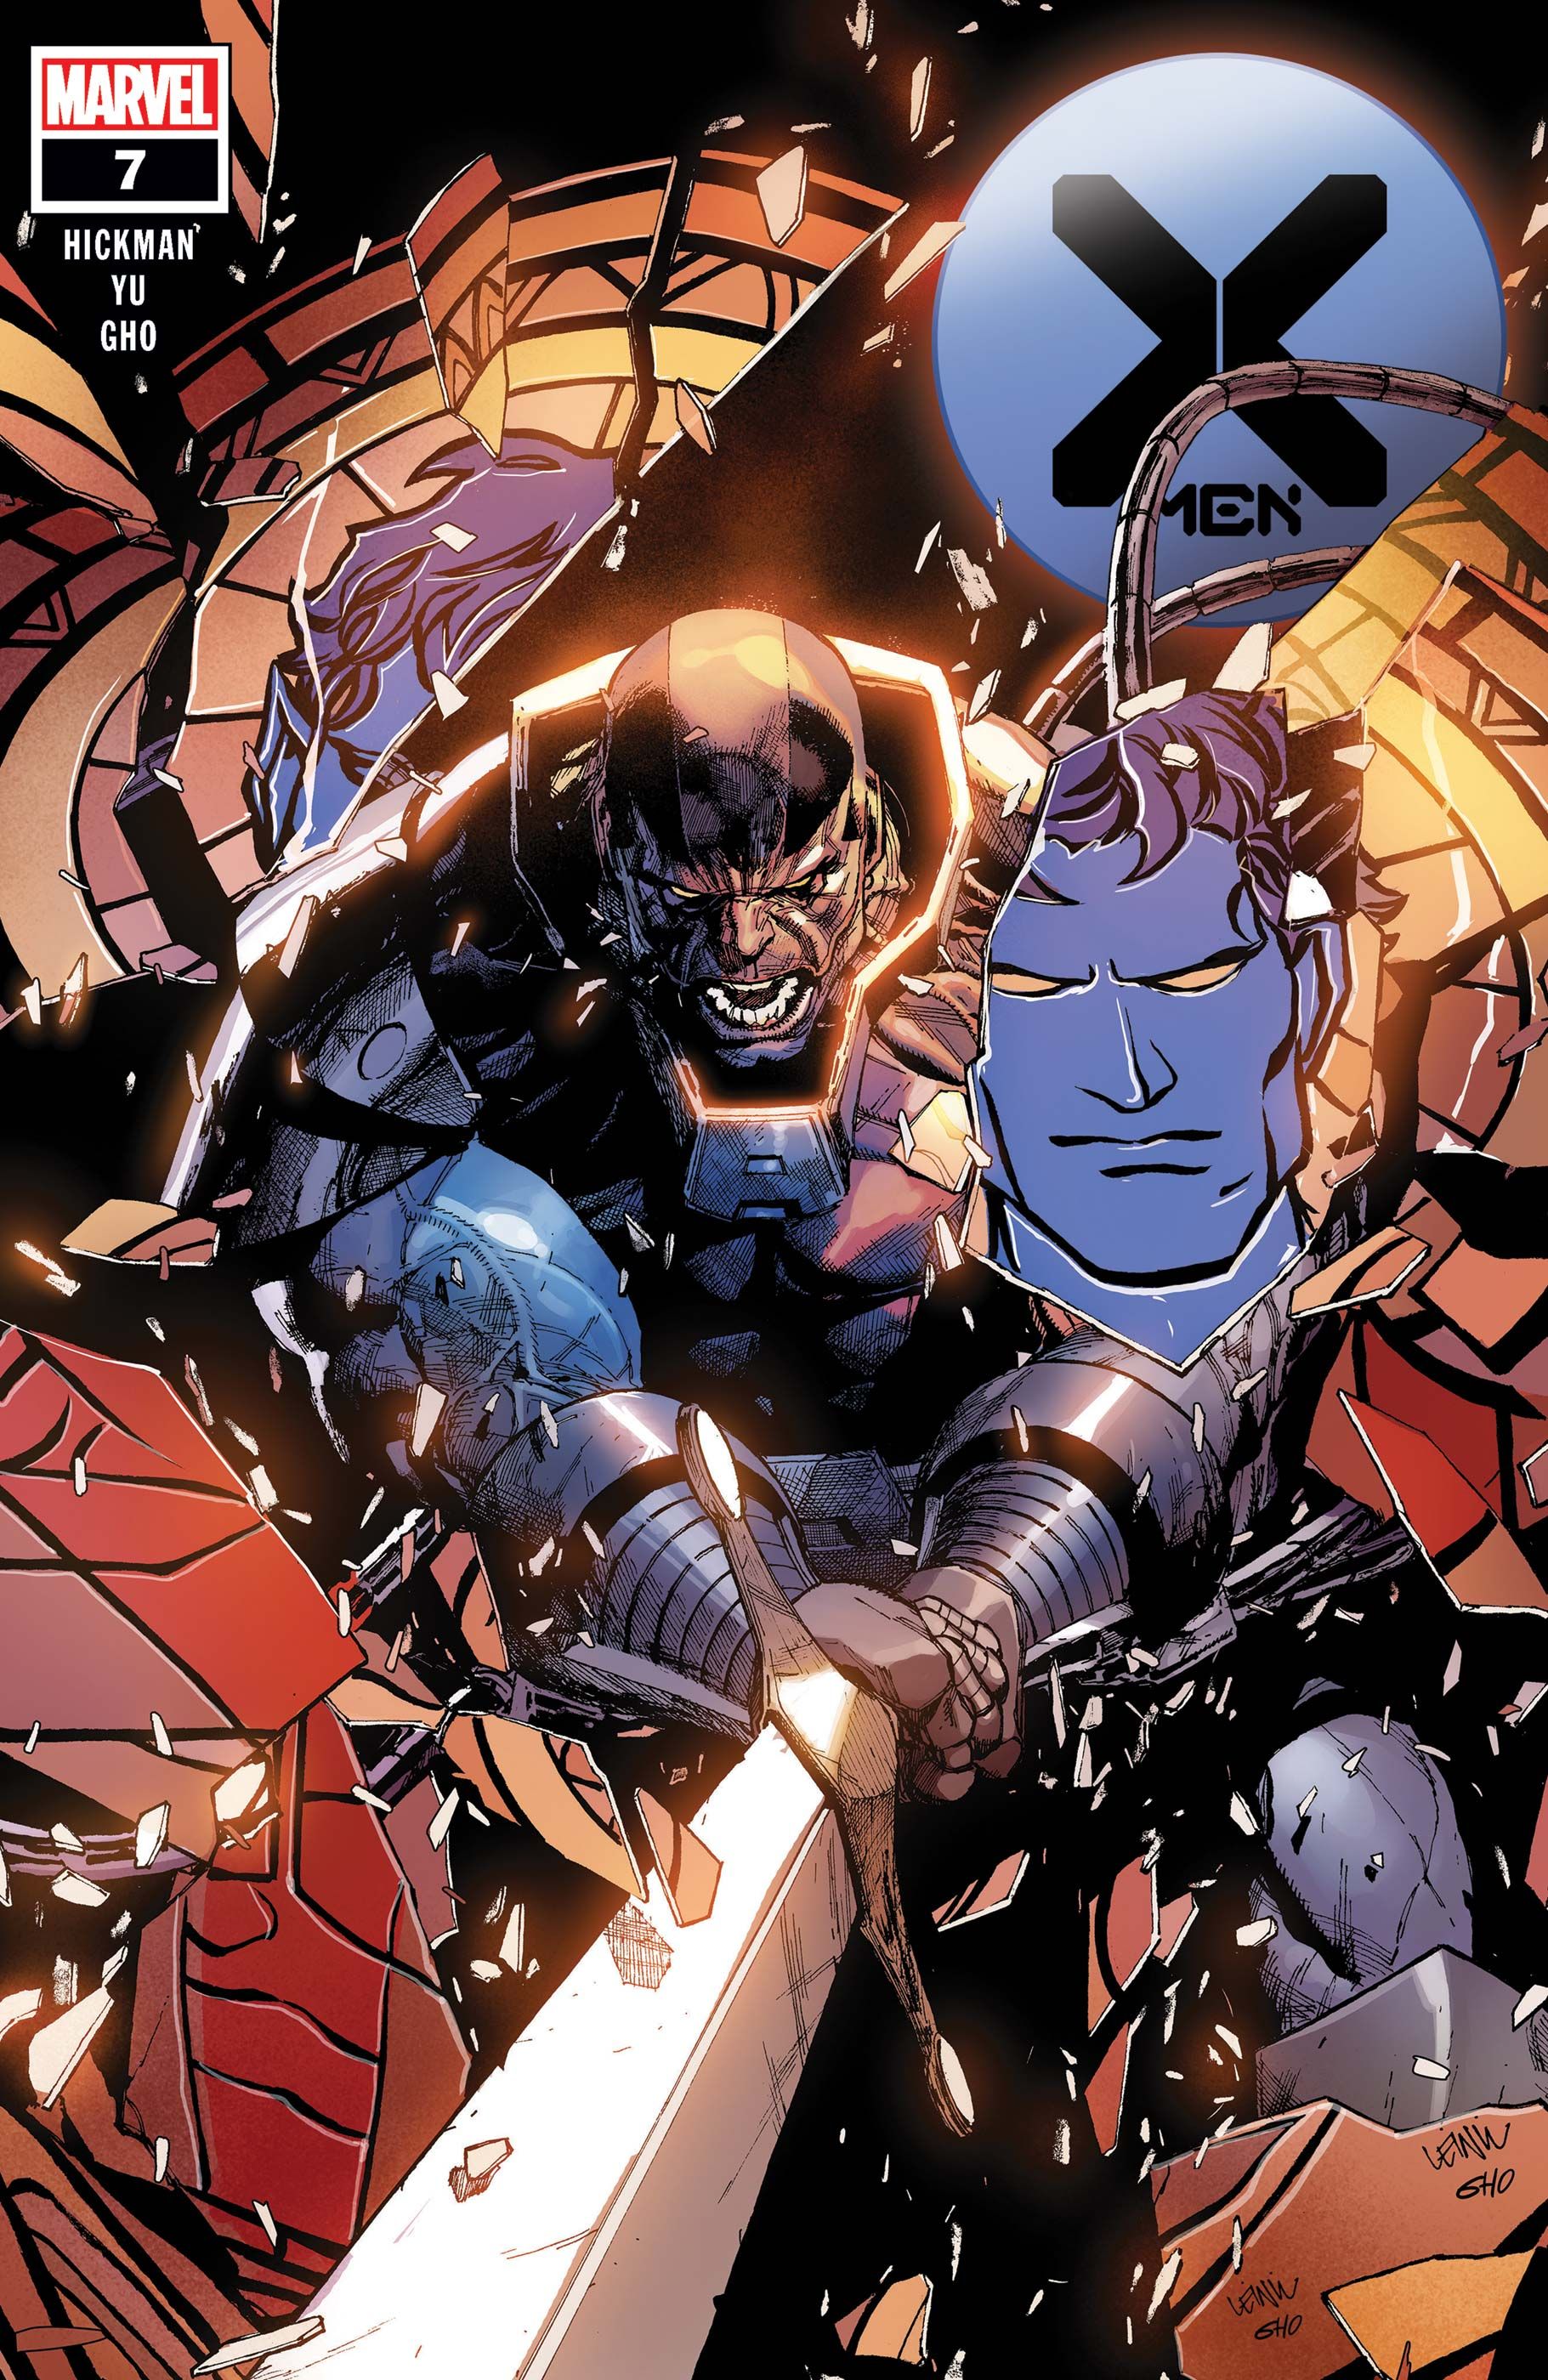 Leinil Francis Yu and Sunny Gho's cover to X-Men (2019) #7, featuring Apocalypse